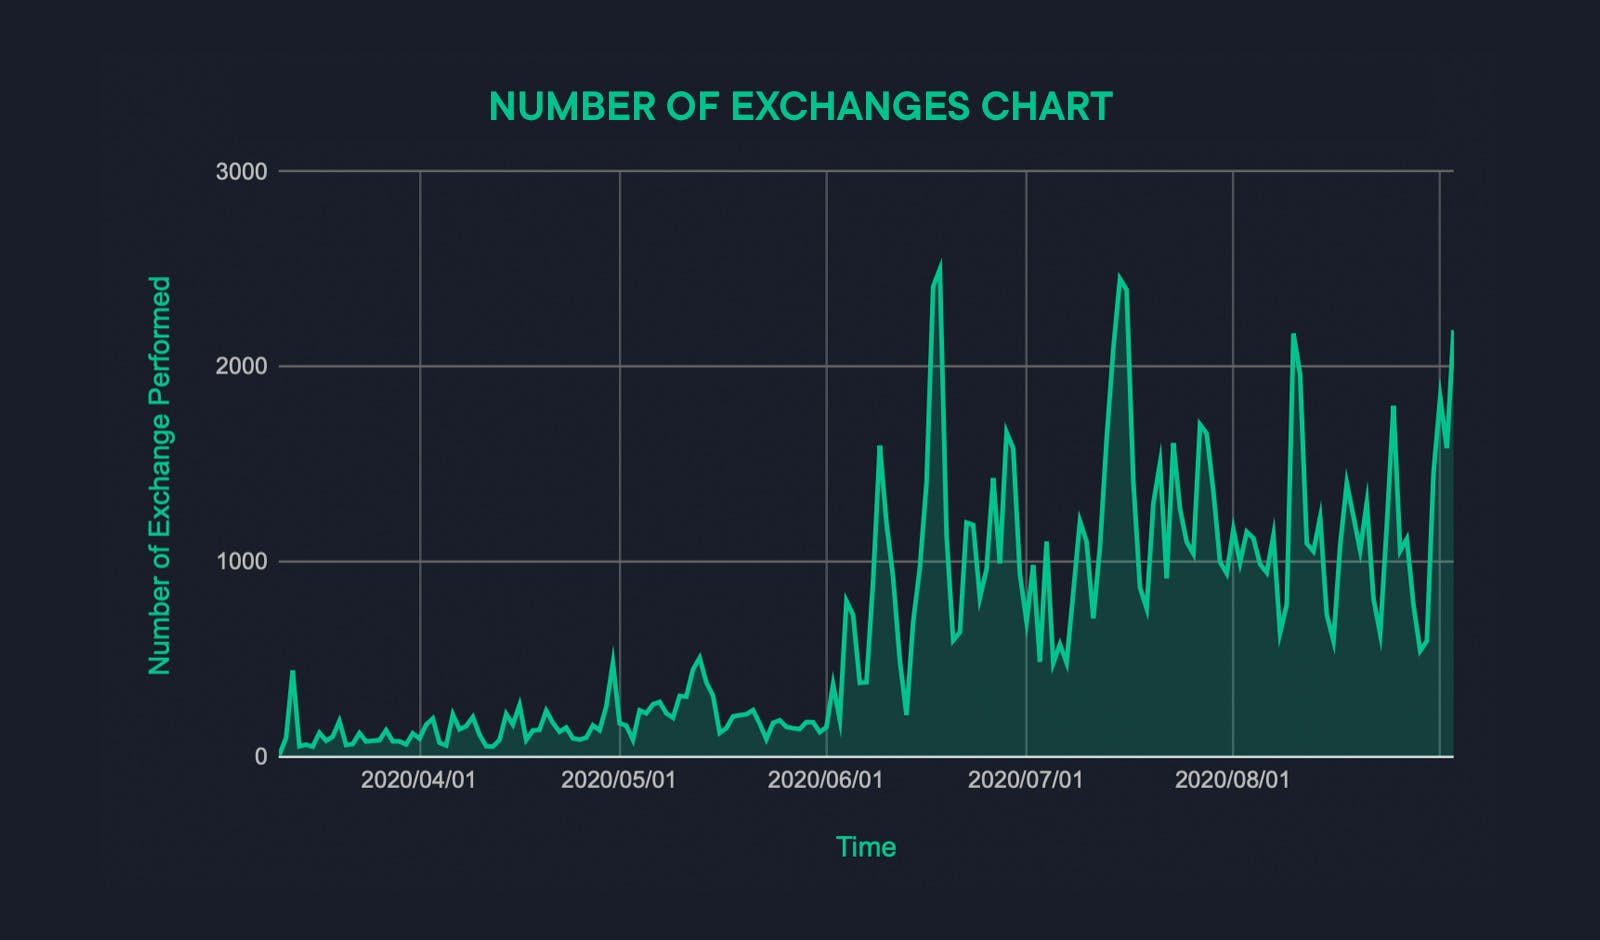 Number of exchanges chart